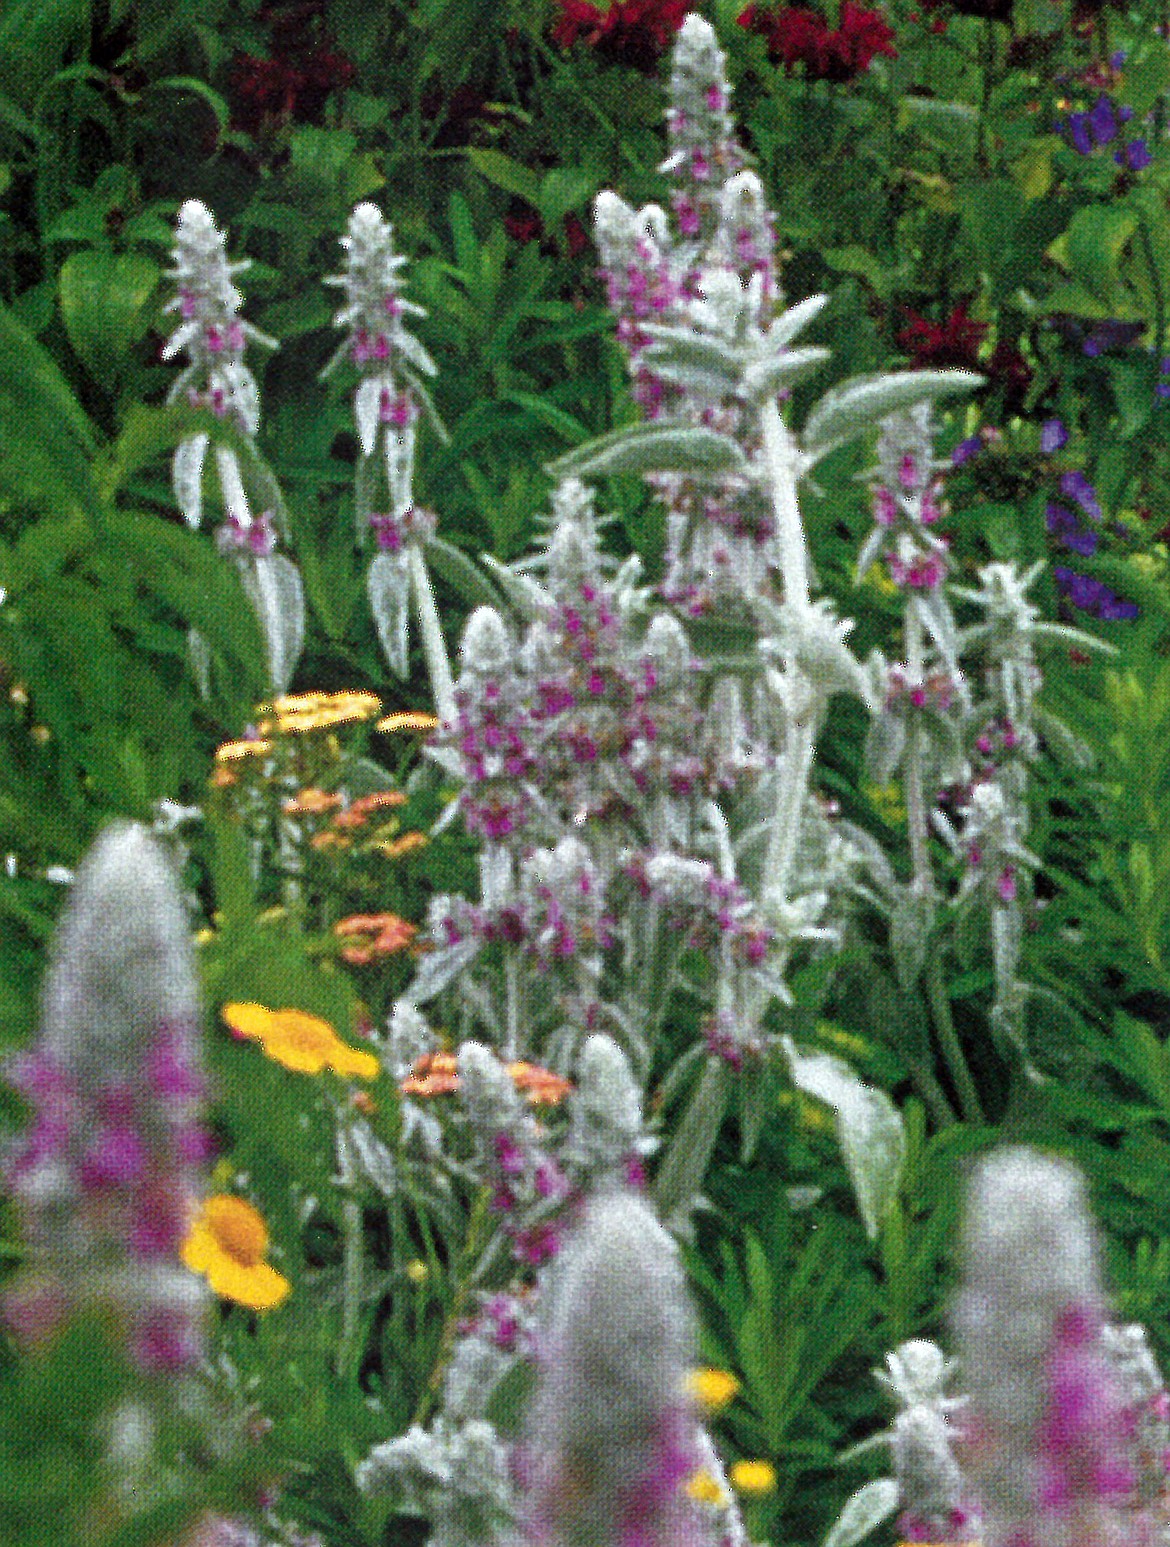 Wooly Lamb’s Ears (Stachys) are soft sweet pettable darlings in the garden — and deer hate them!